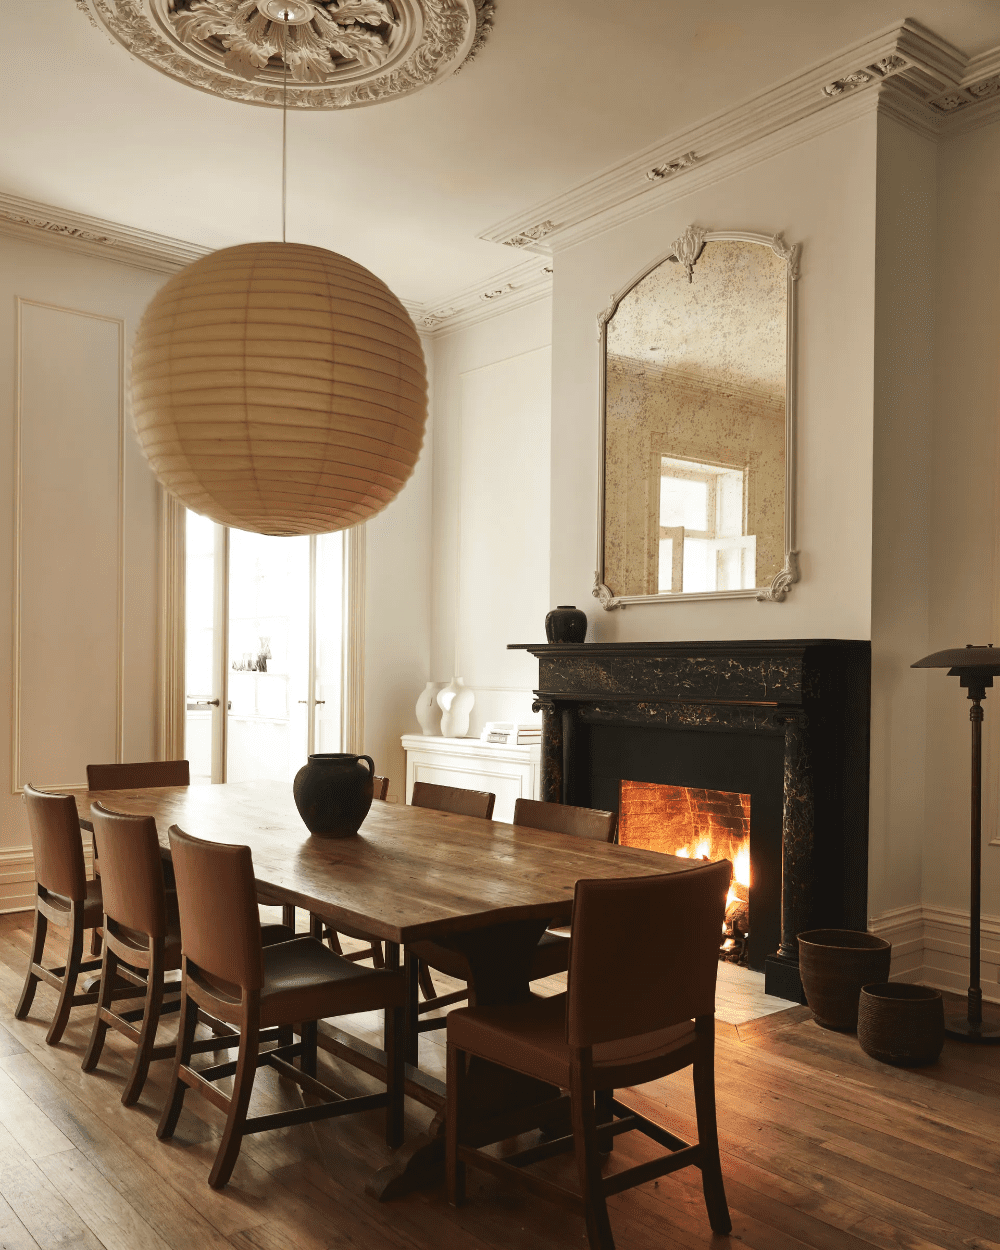 Tour a Historic New York Town House Restored by Sandra Bullock